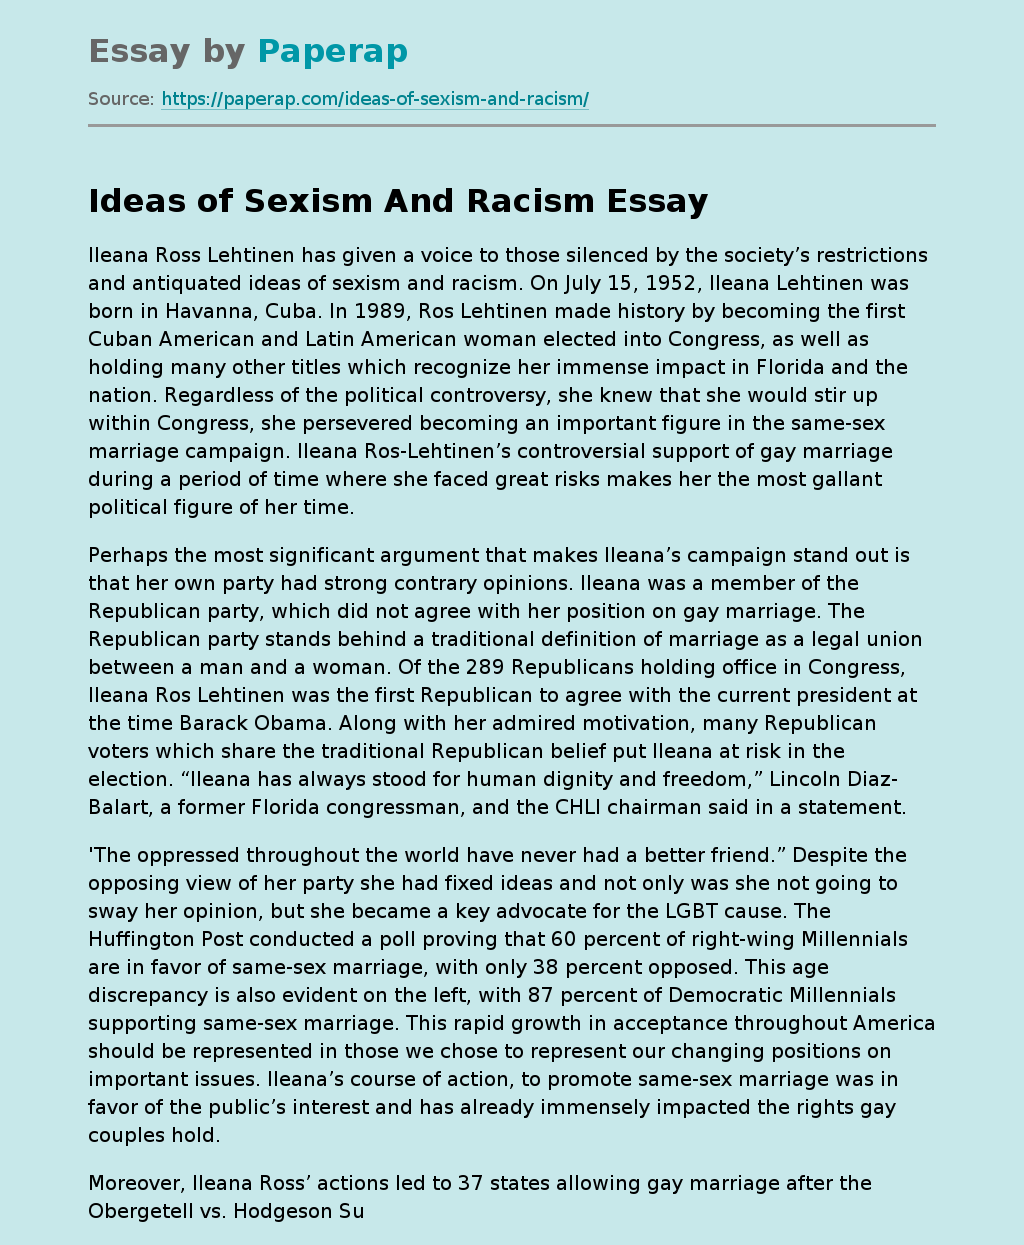 Ideas of Sexism And Racism